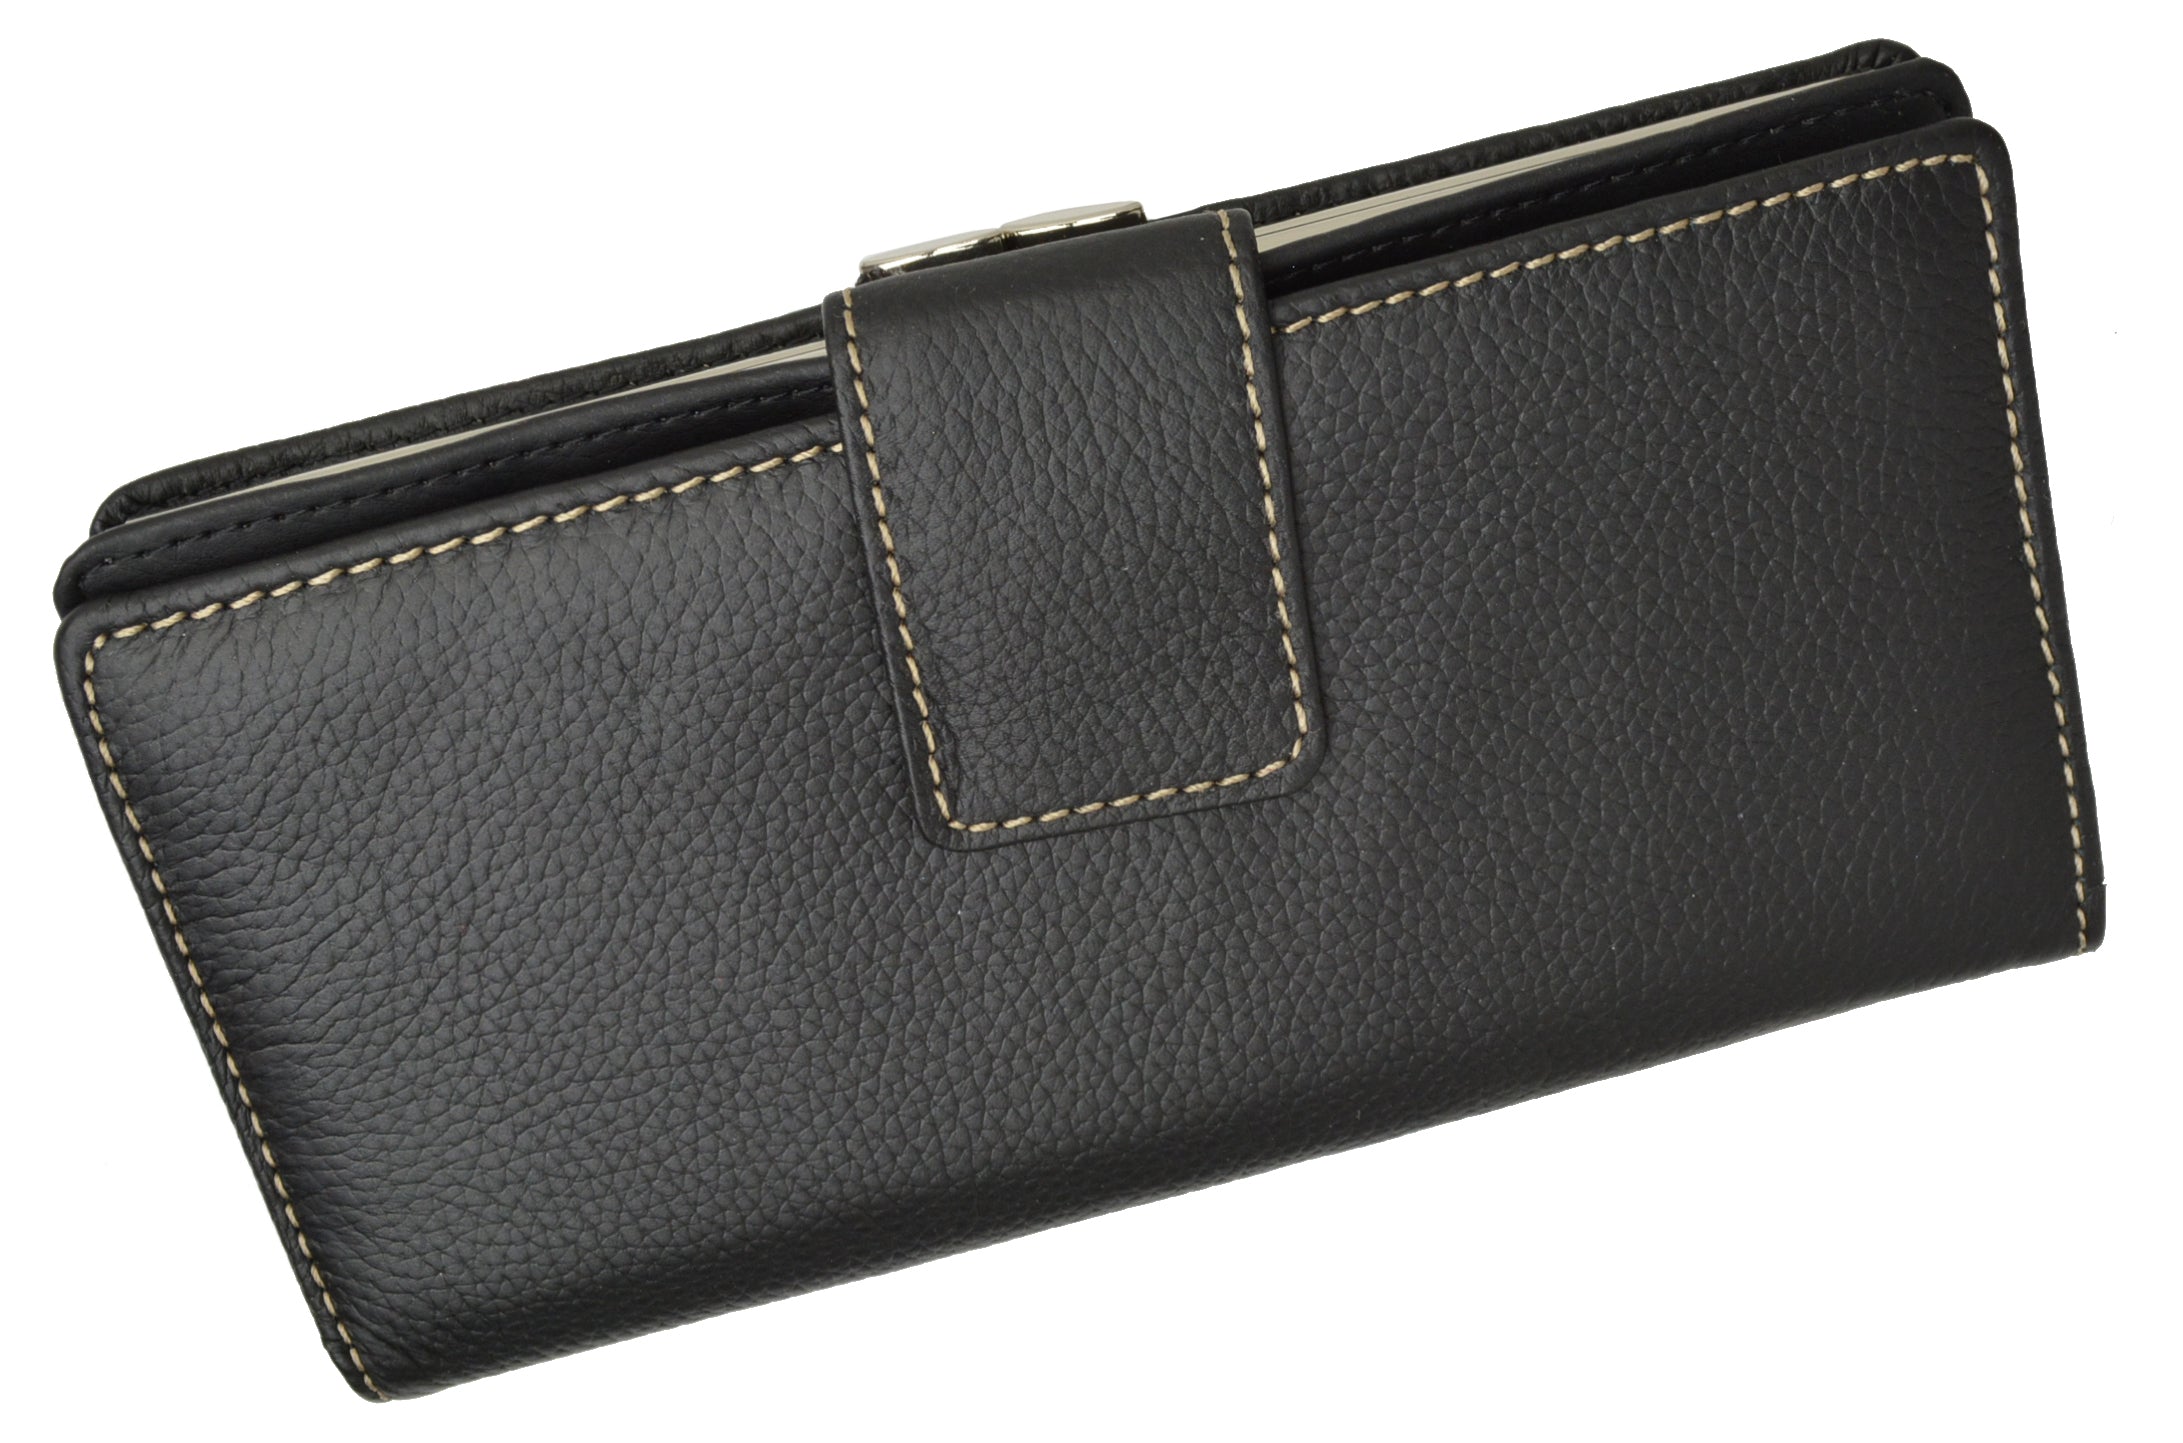 Rio Leather Indexer Wallet - Mundi Wallets